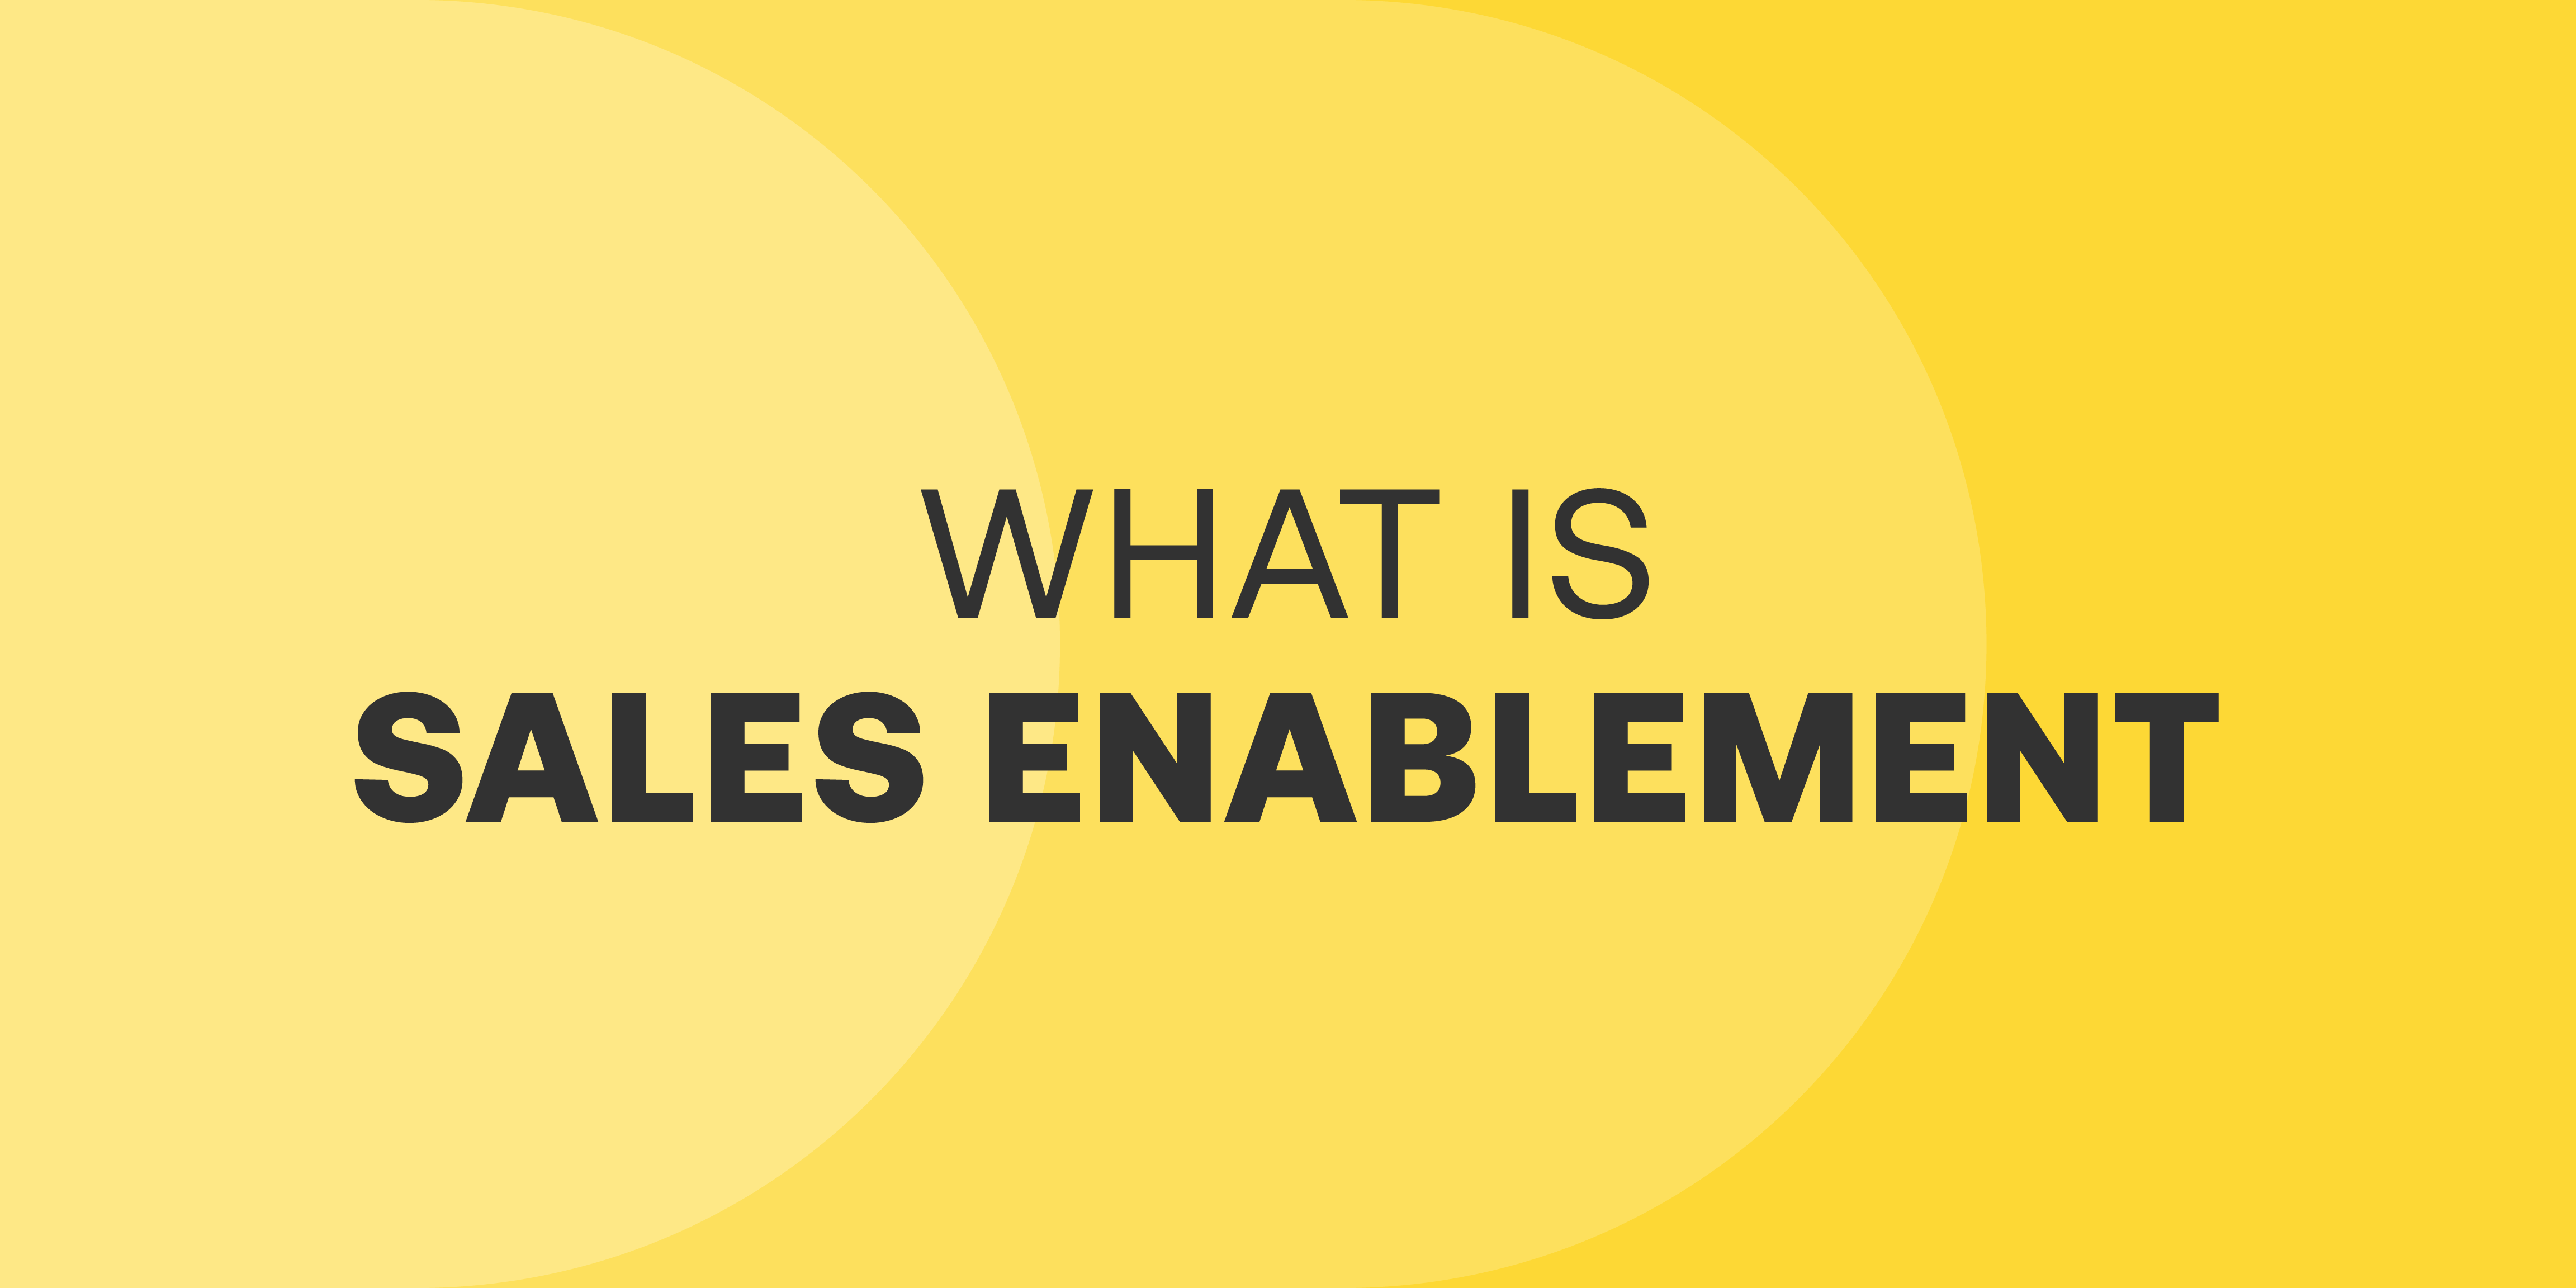 Definition of Sales Enablement